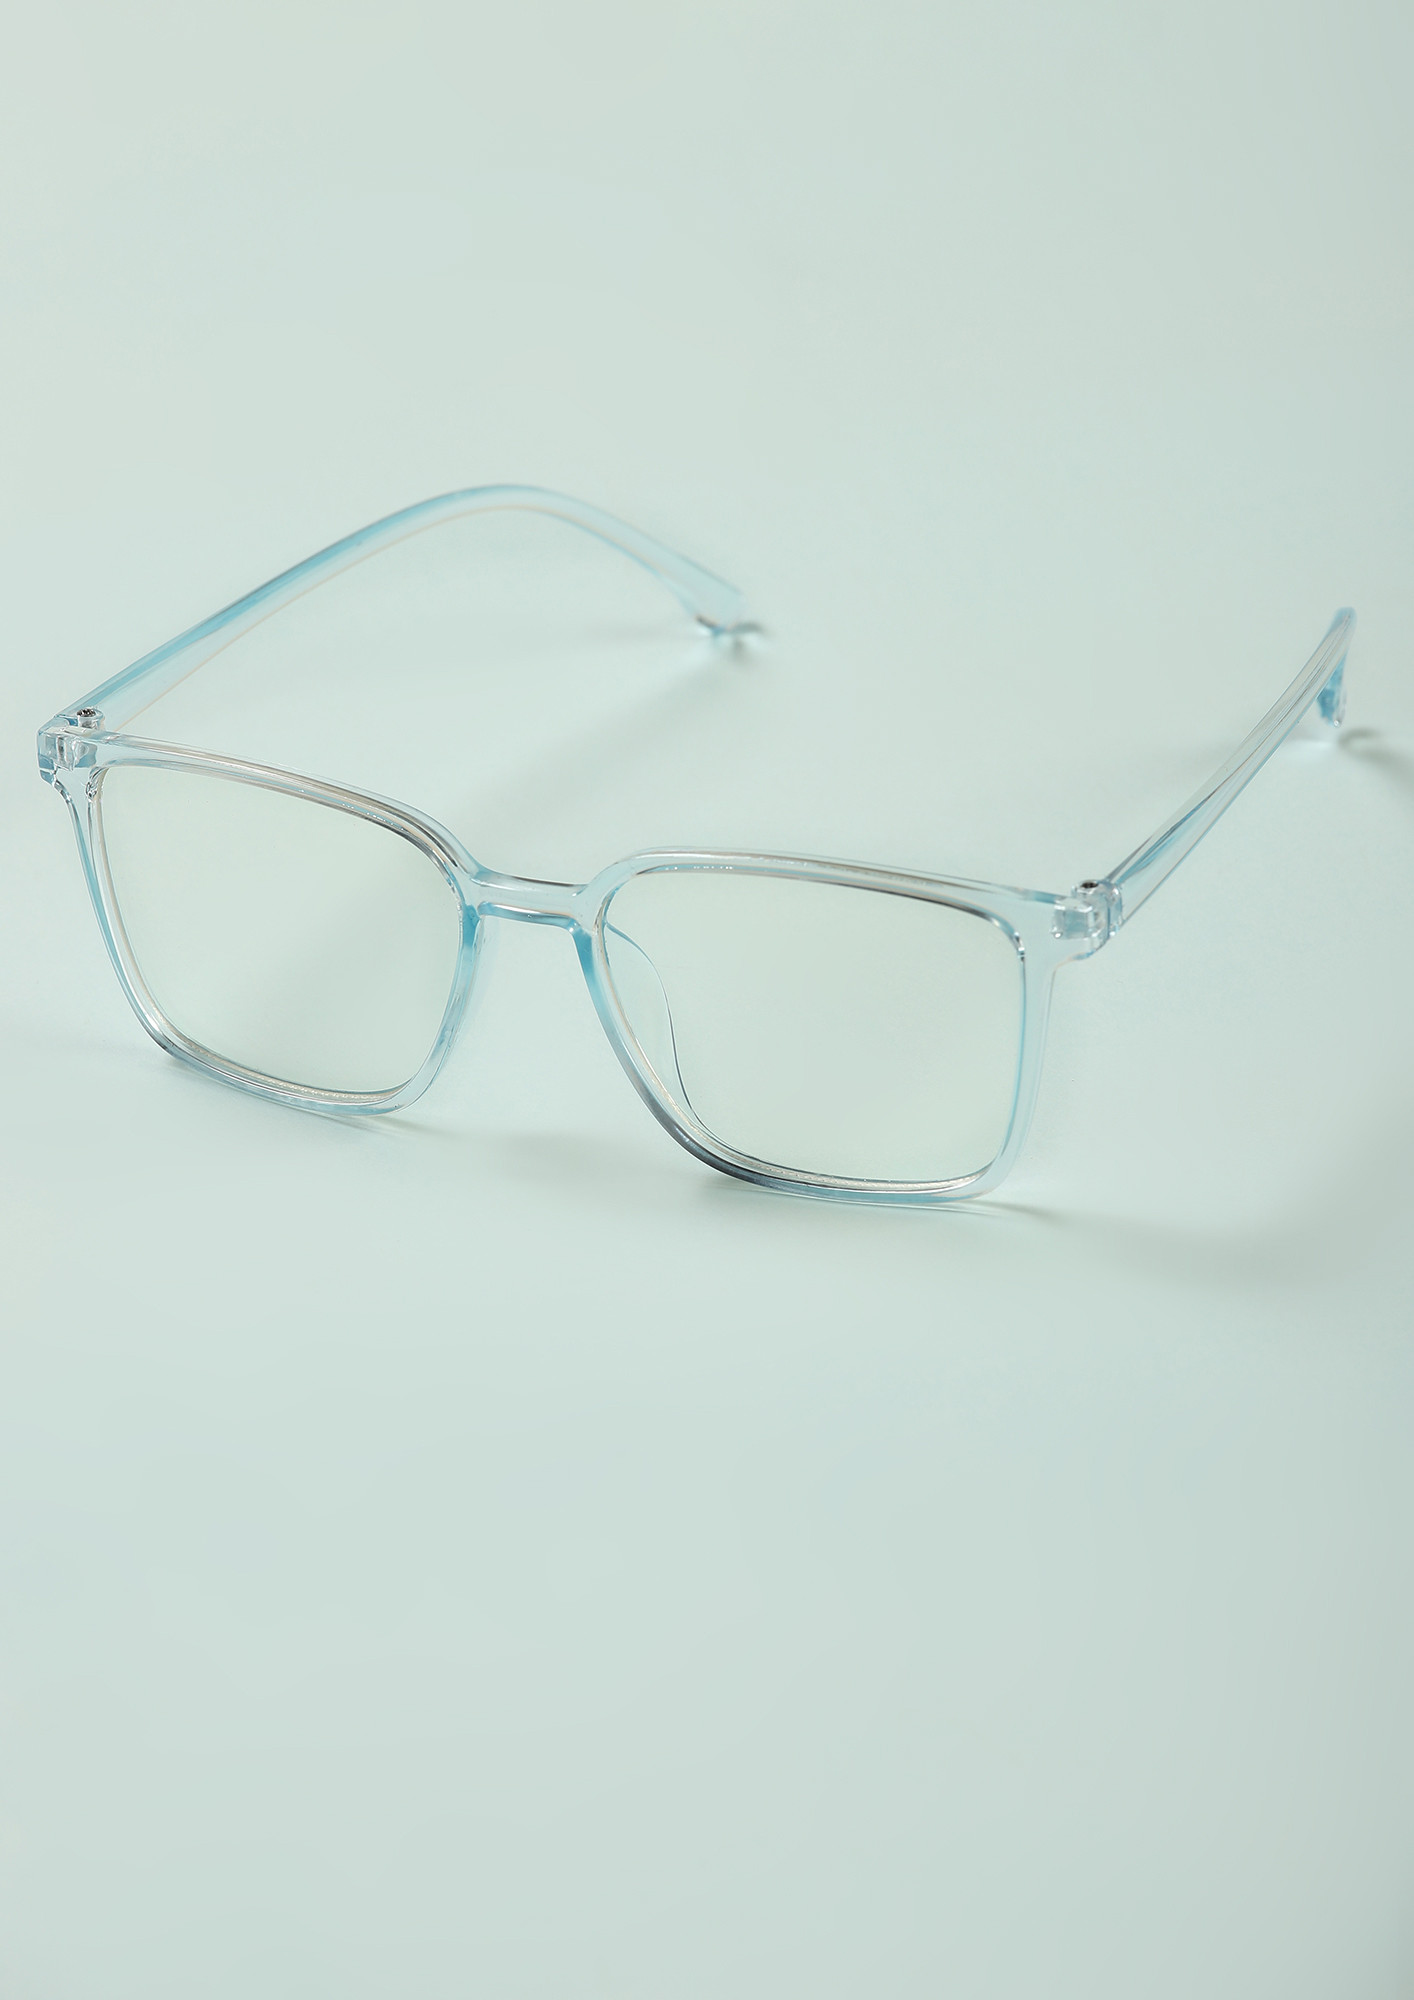 THE CLEAR PICTURE BLUE SQUARE SUNGLASSES